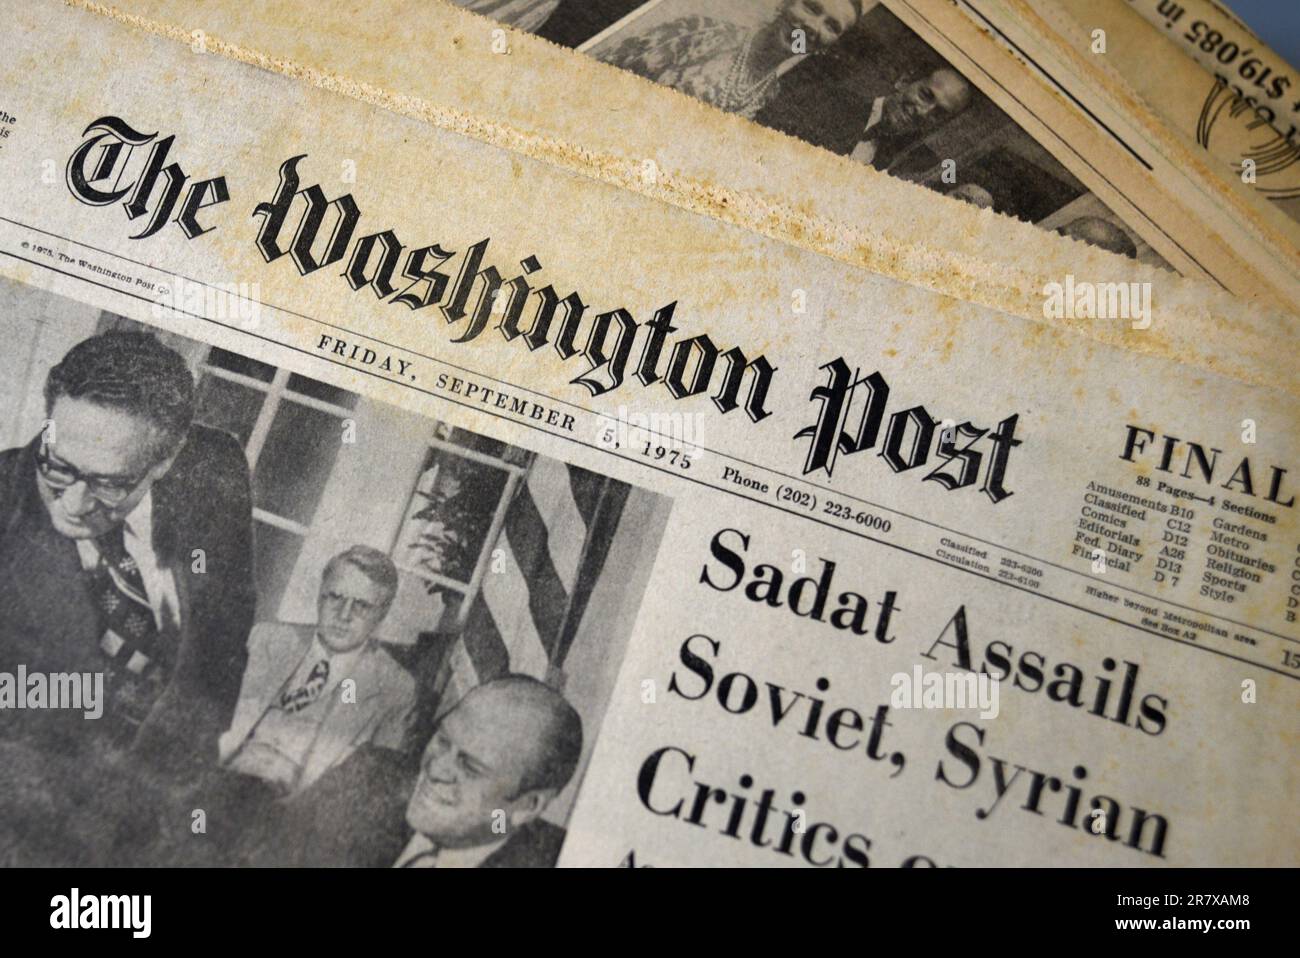 A copy of the September 5, 1975 edition of The Washington Post for sale in an American antique shop. Stock Photo